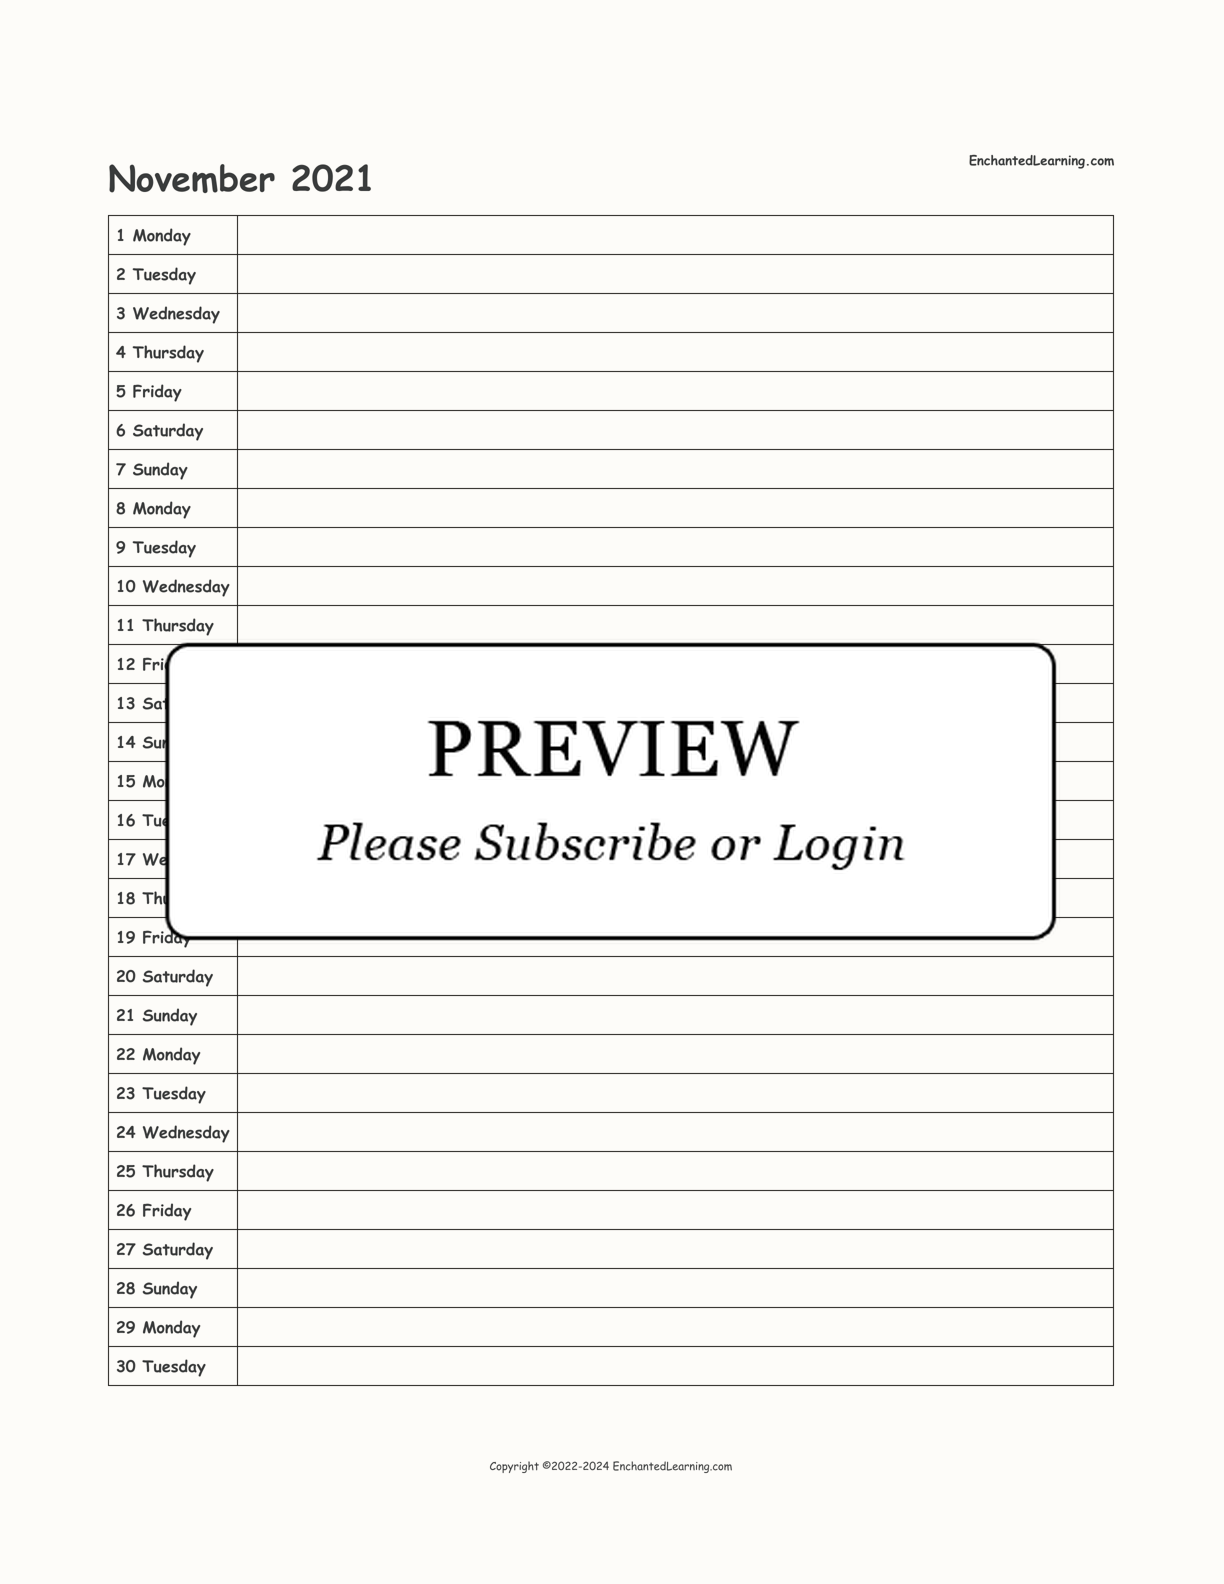 2021 Scheduling Calendar interactive printout page 11